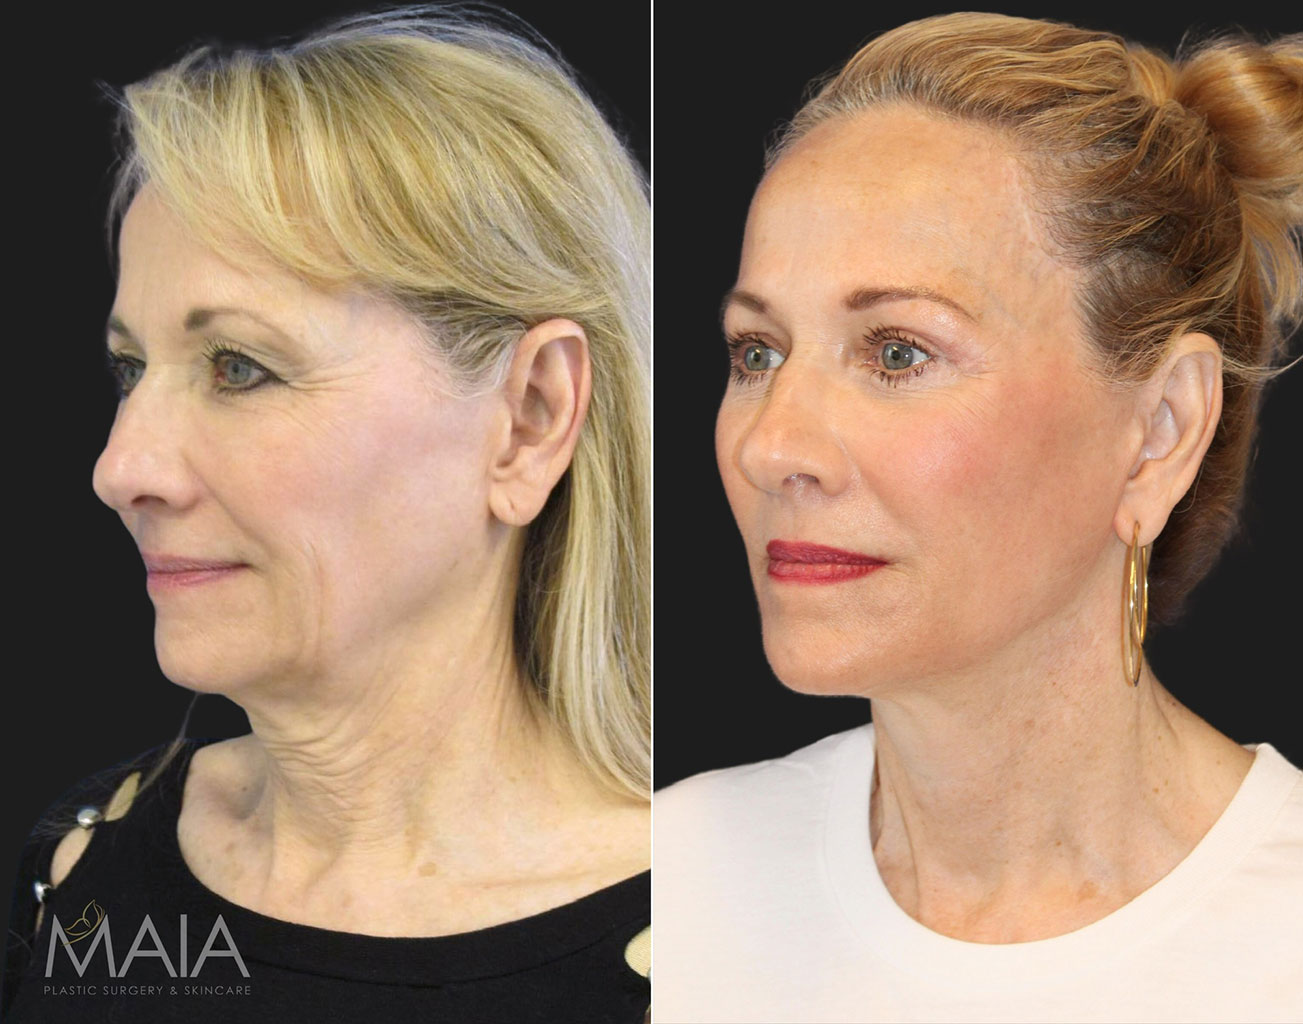 Before and 1 year after comprehensive facial rejuvenation